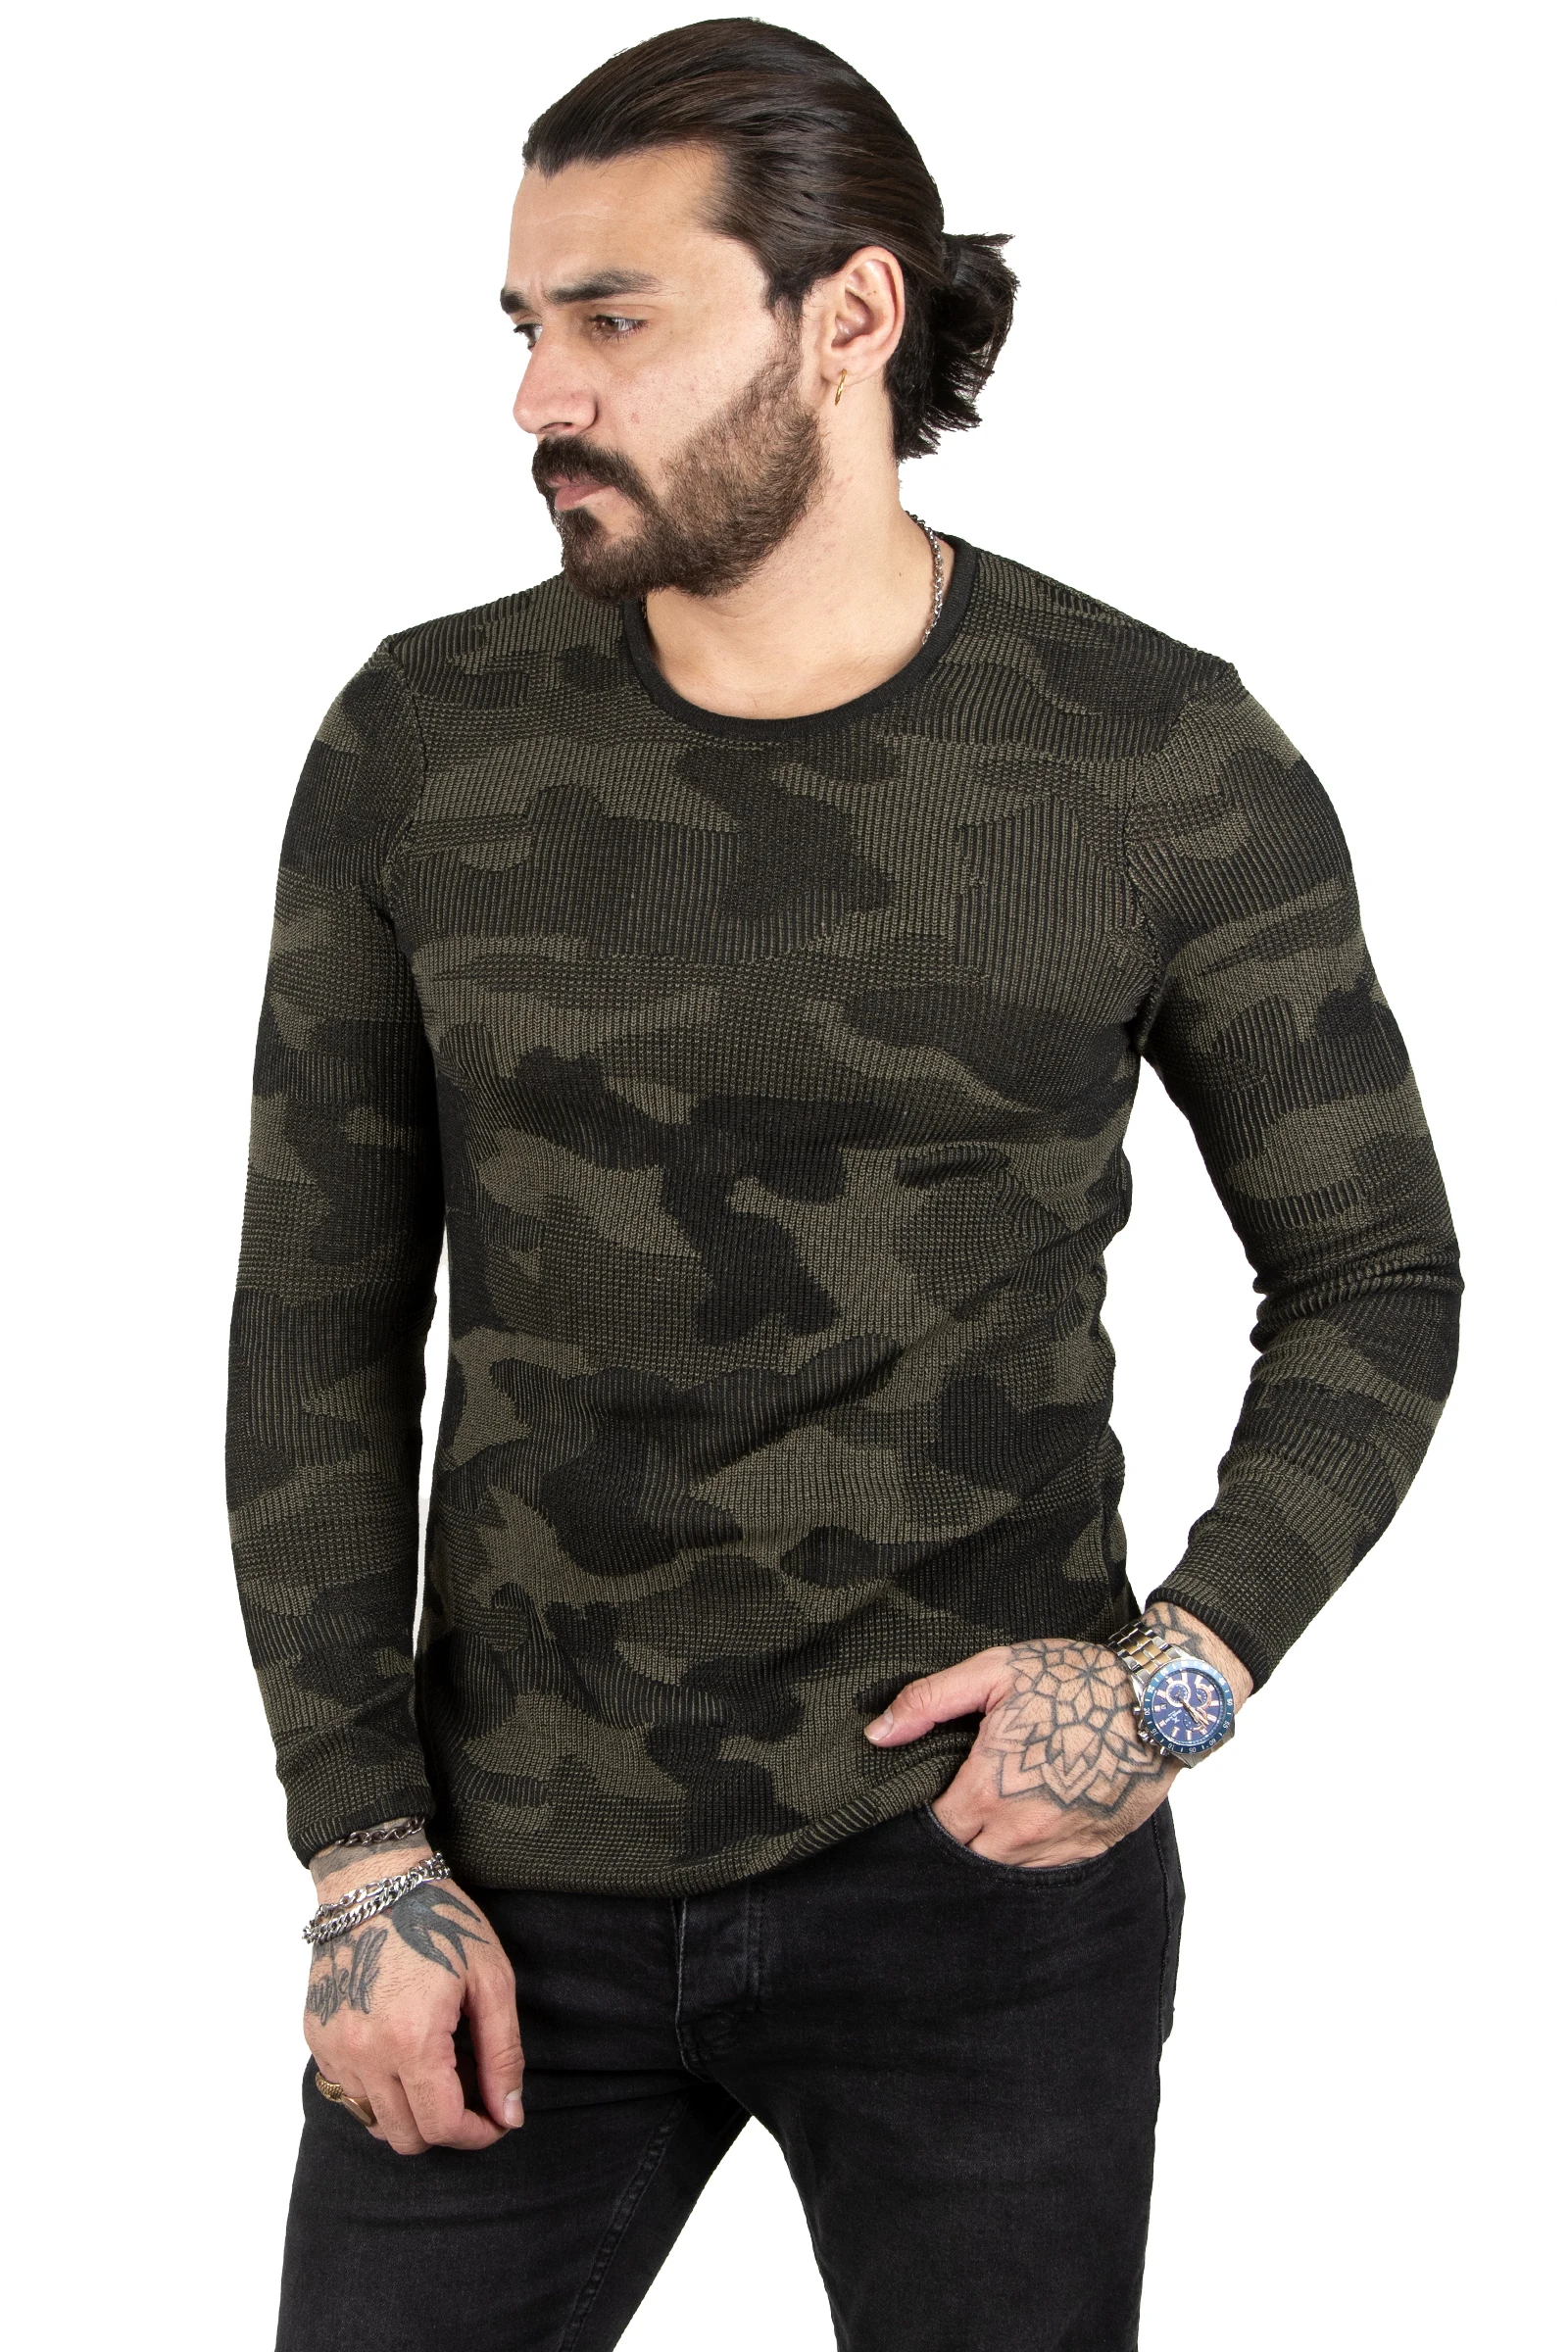 

DeepSEA With Camouflage Pattern Round Collar Knitwear Sweater 2202530